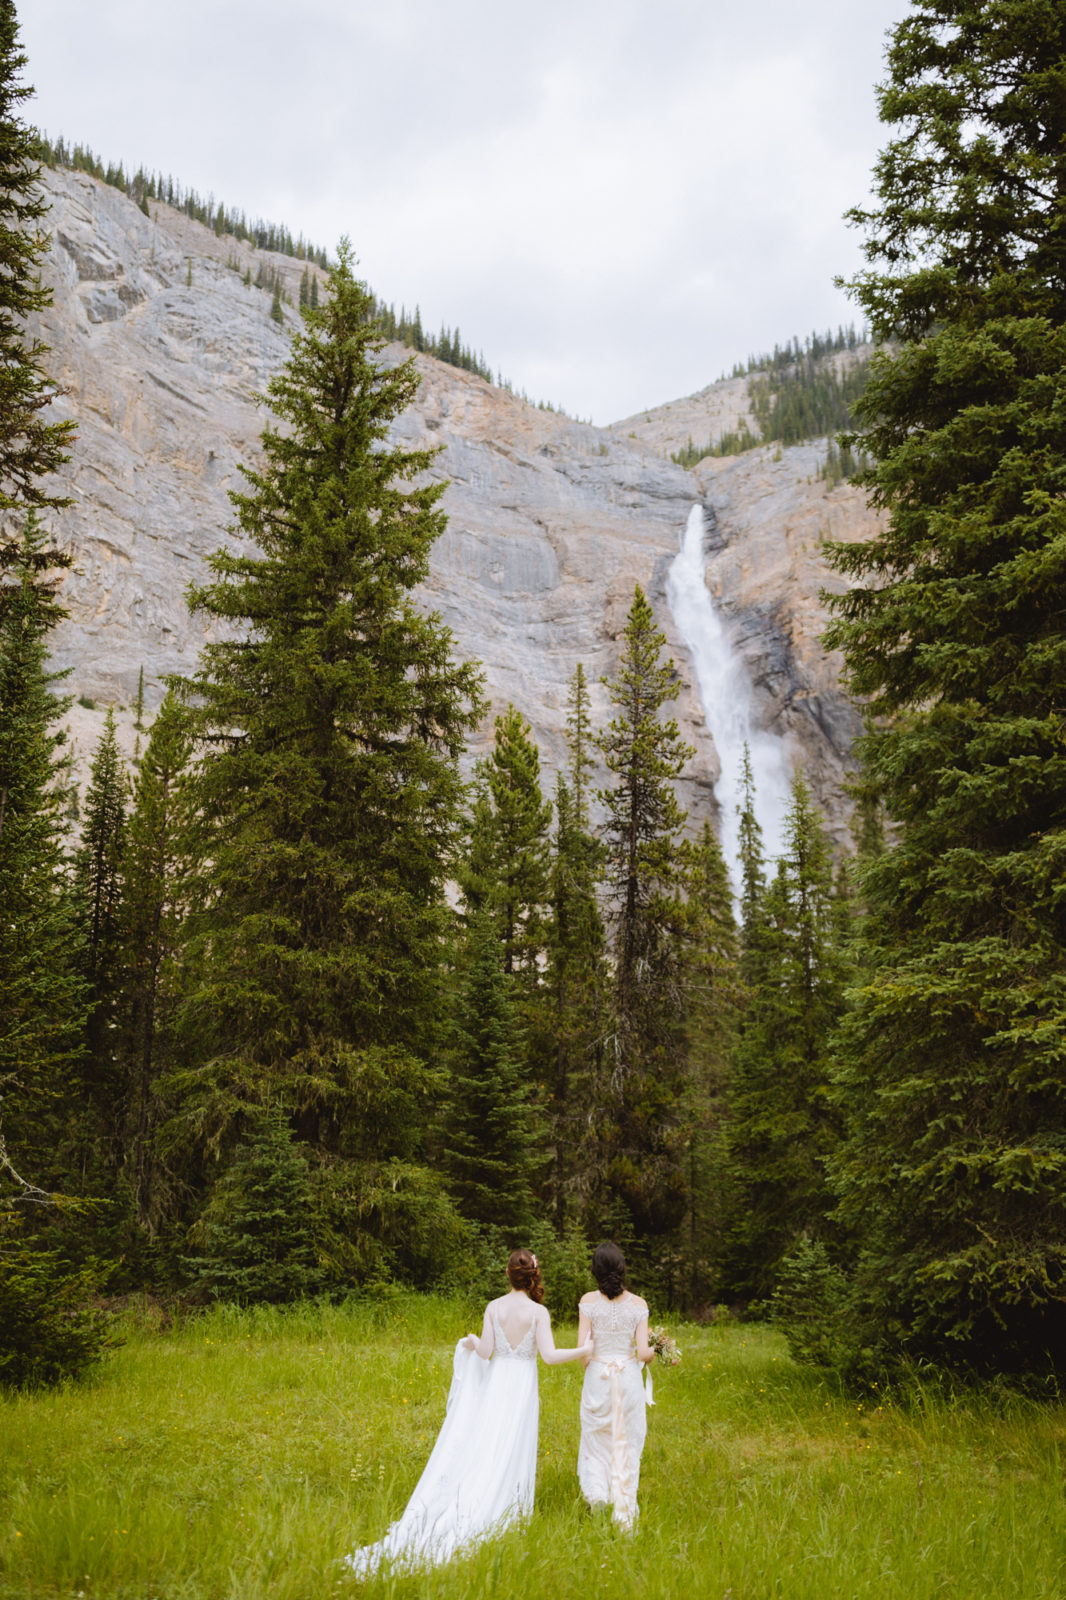 Newly weds in romantic flowing gowns walk towards Takakkaw Falls for their Elopement in Yoho National Park